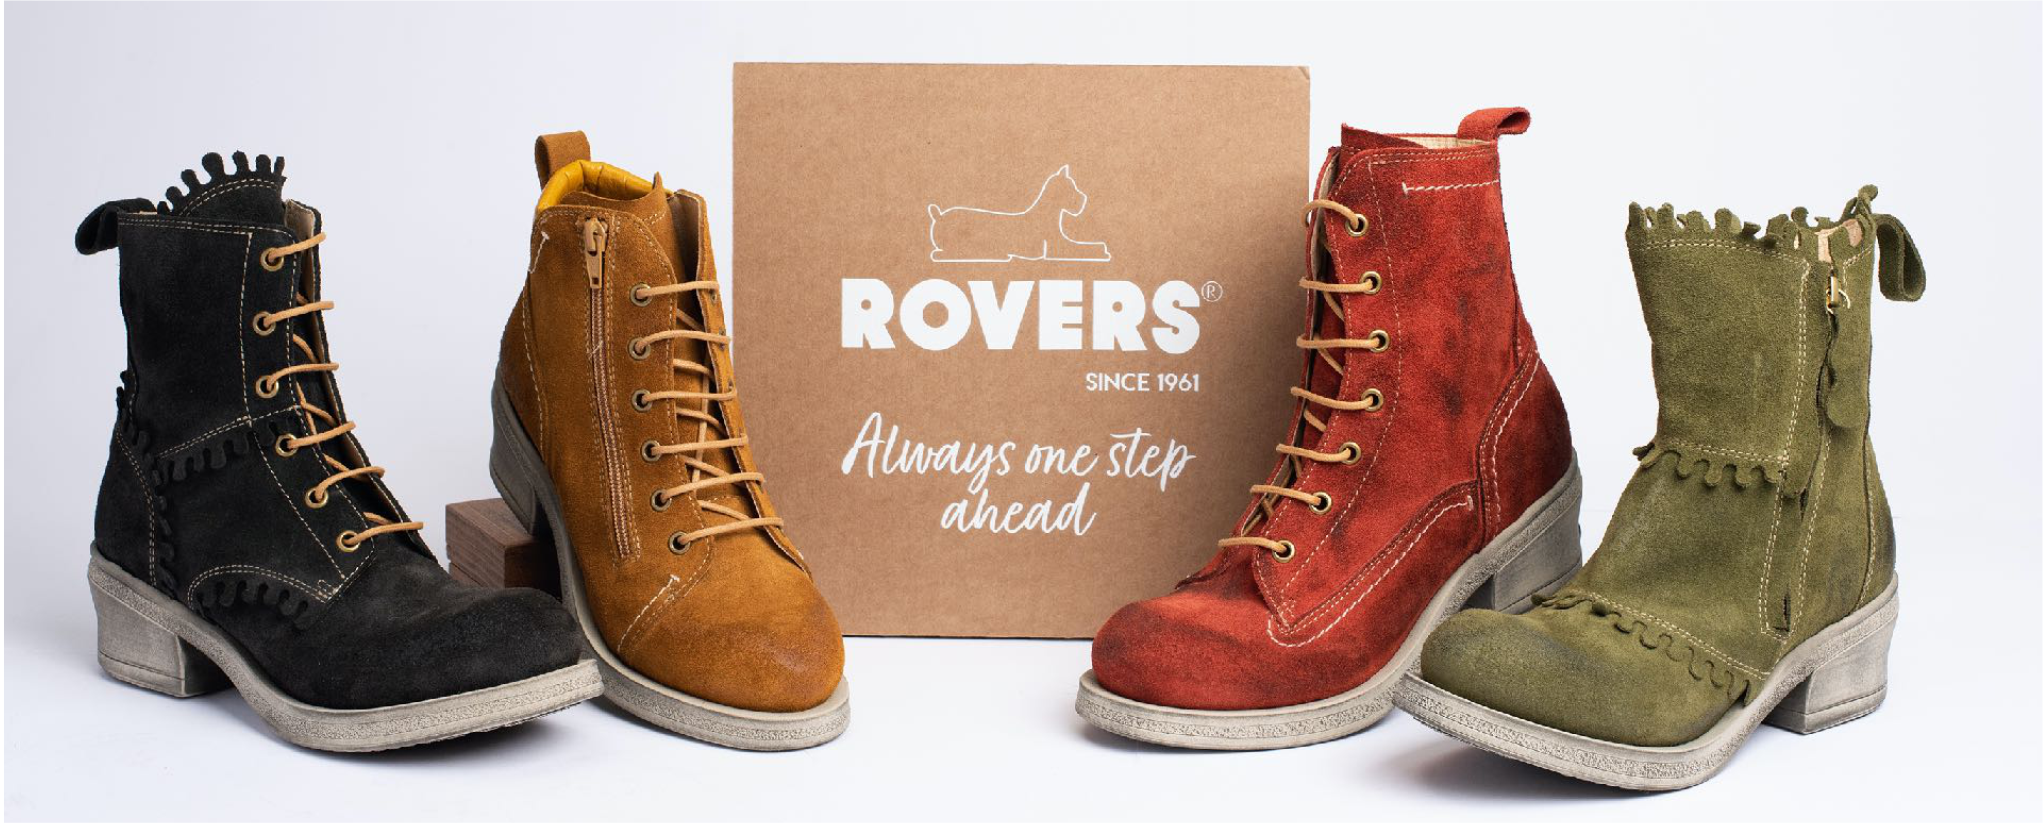 Total 51+ imagen rovers shoes - Abzlocal.mx